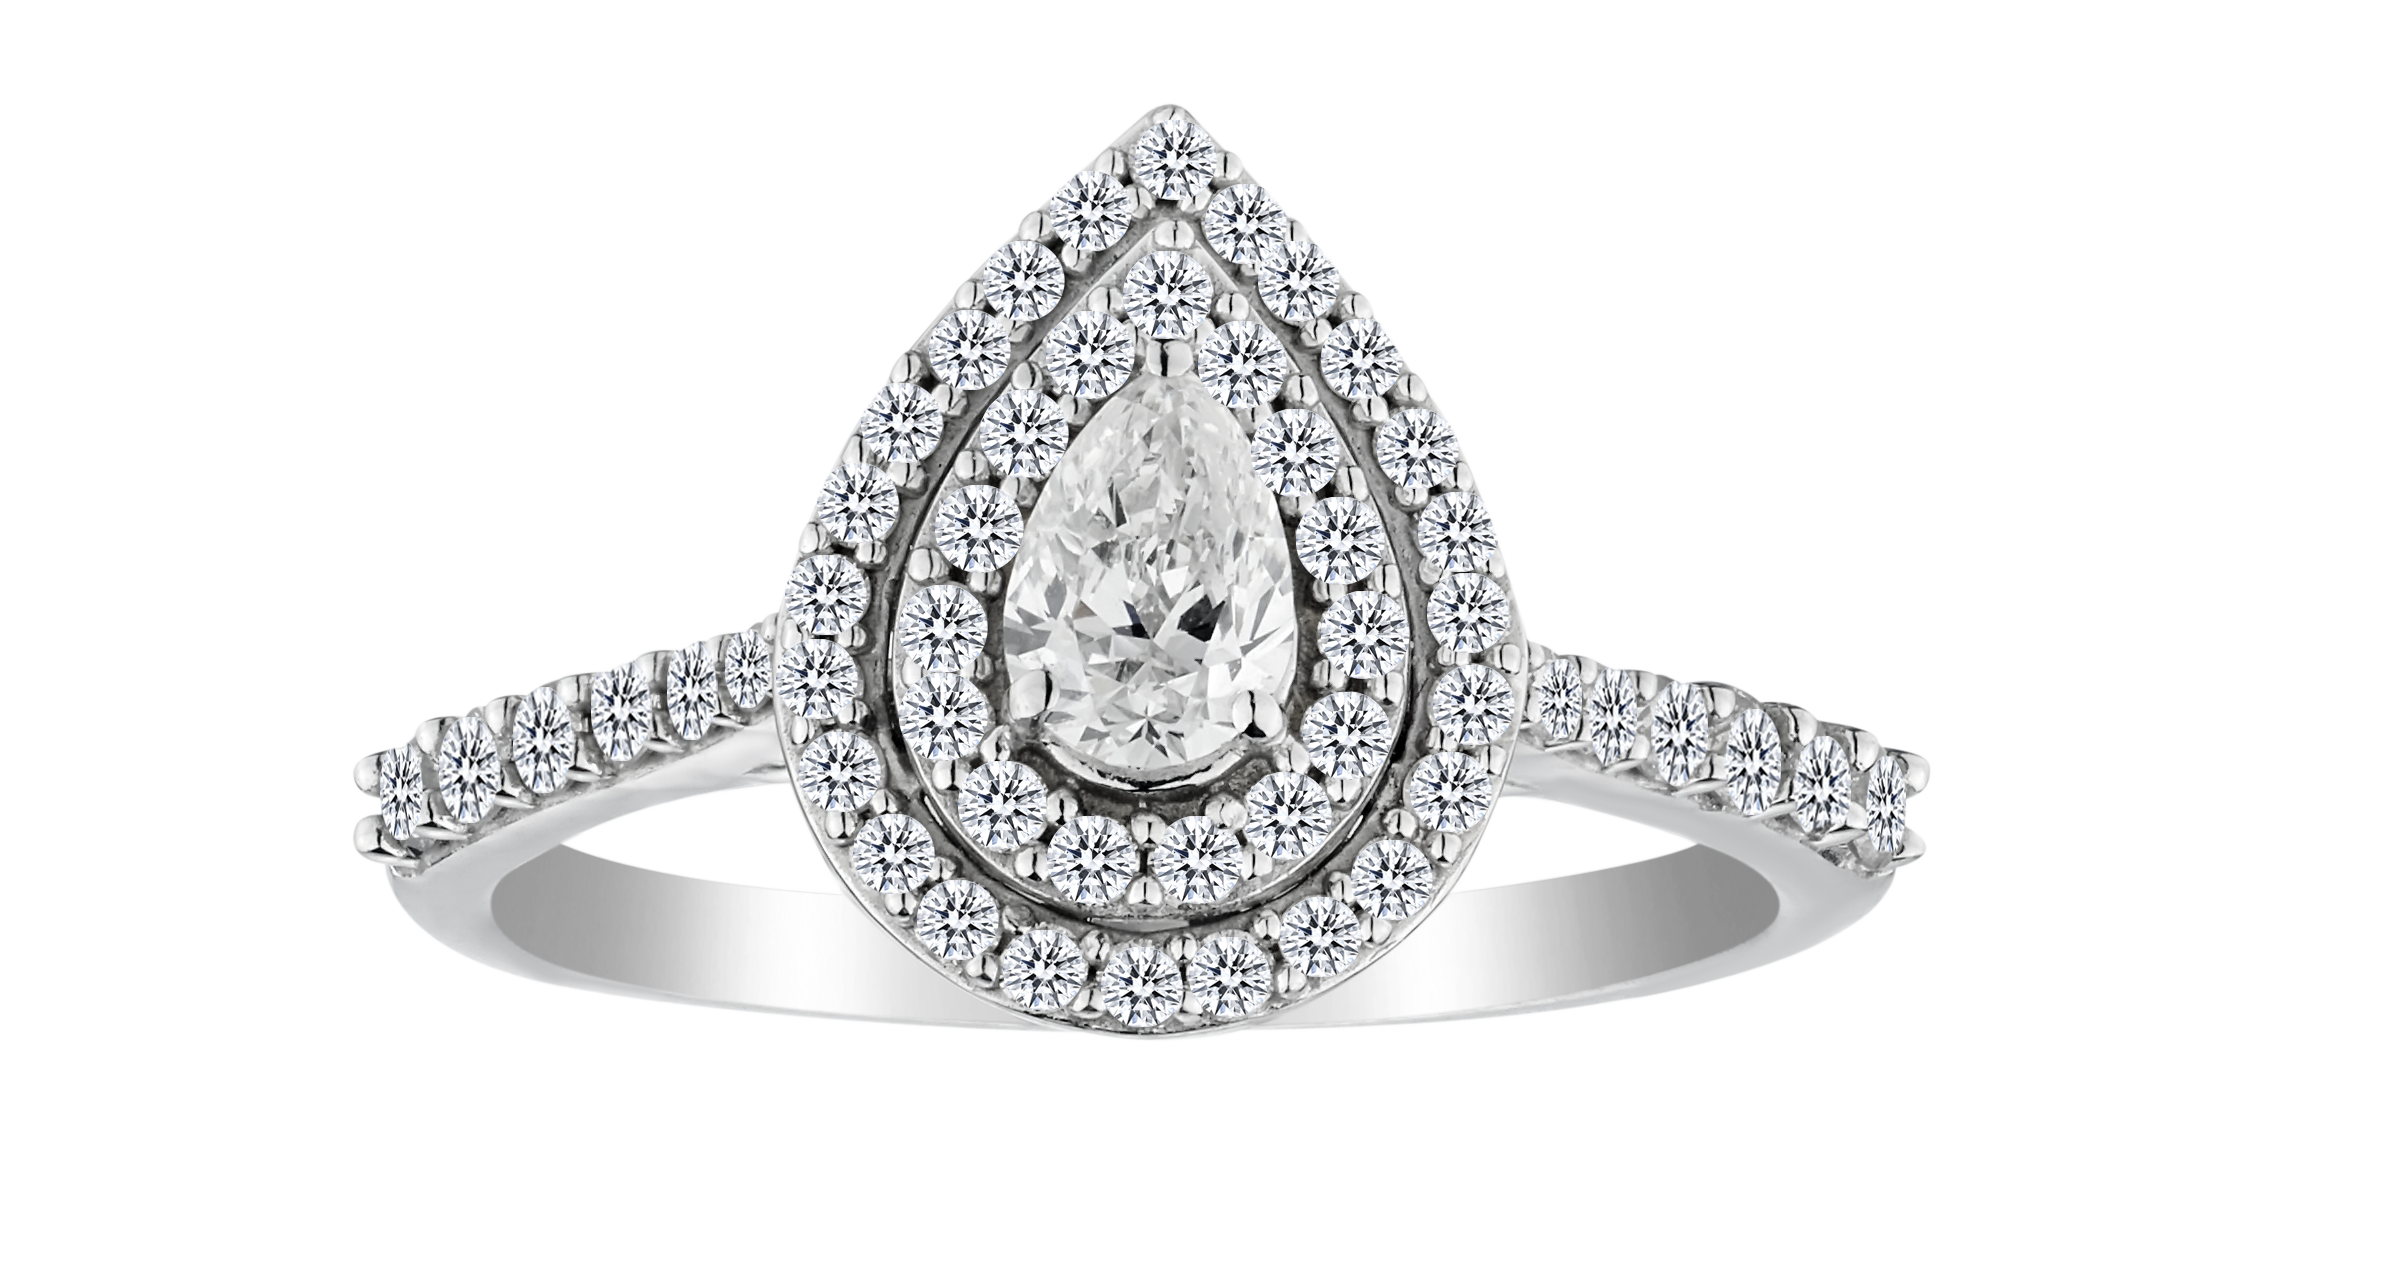 .75 Carat Diamond Double Halo Pear Shape Ring, 14kt White Gold.....................NOW